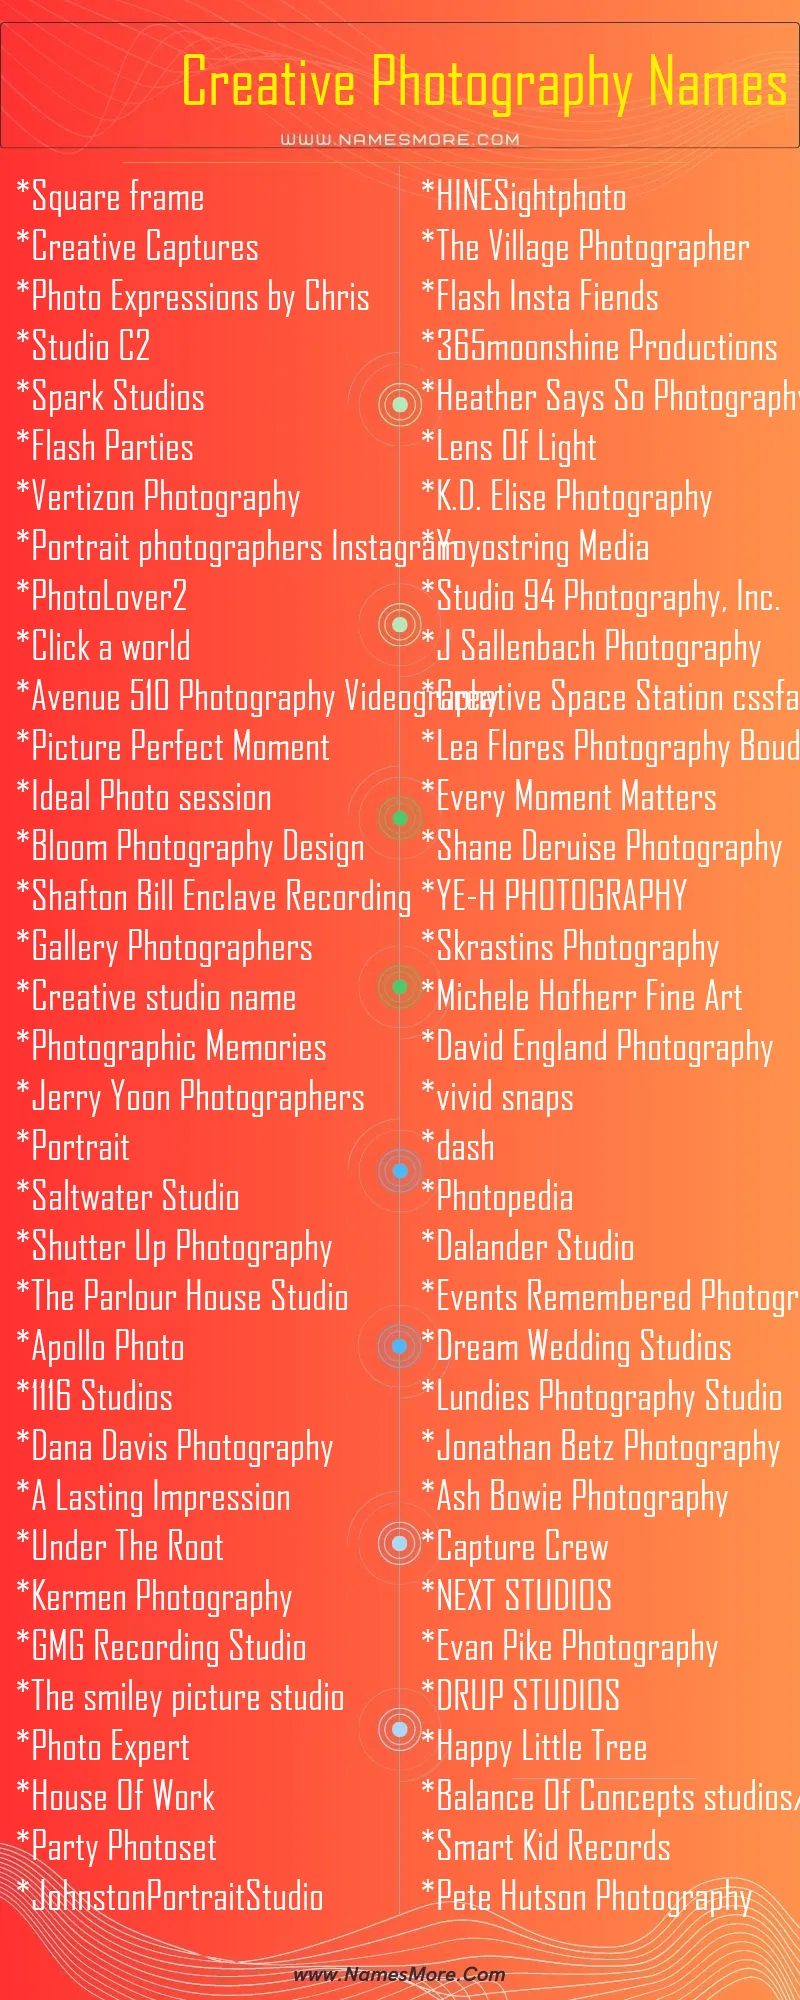 Photography Names for Instagram List Infographic